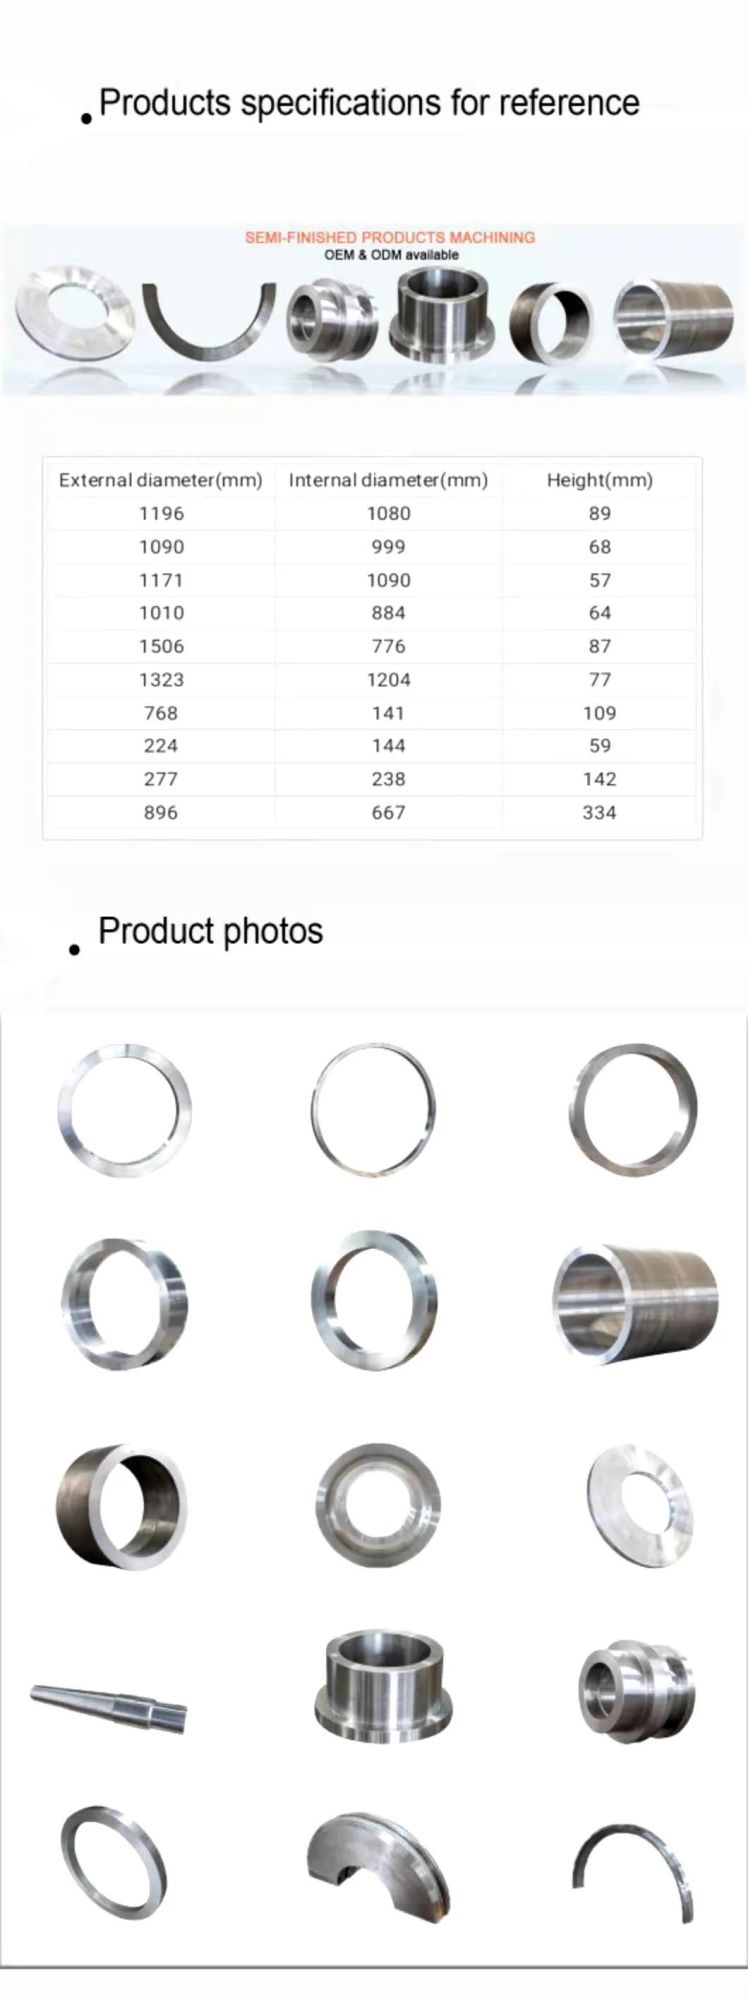 Stainless Steel Ring for Metallurgy, Agricultural, Electrical Machinery Industries